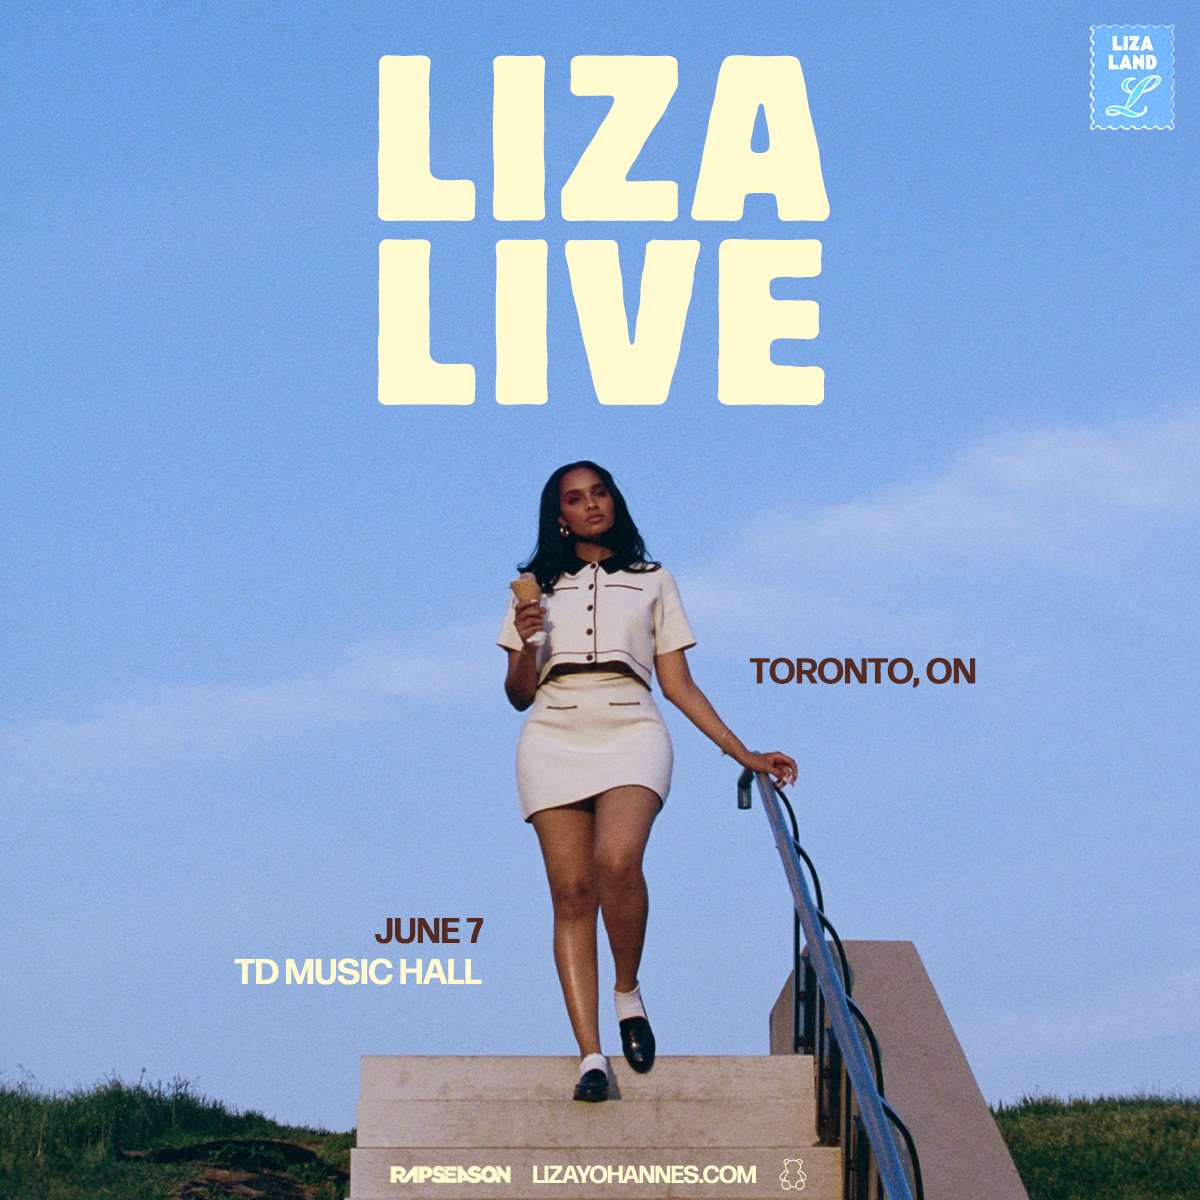 ✨JUST ANNOUNCED✨ @lizayohannes returns for a hometown headline show on June 7 at @tdmusichall. RAPSEASON Pre-sale runs Wednesday from 10AM-10PM. 🔒CODE: MORE Tickets on sale Friday at 10AM. 🎫: bit.ly/RSxLIZALIVE